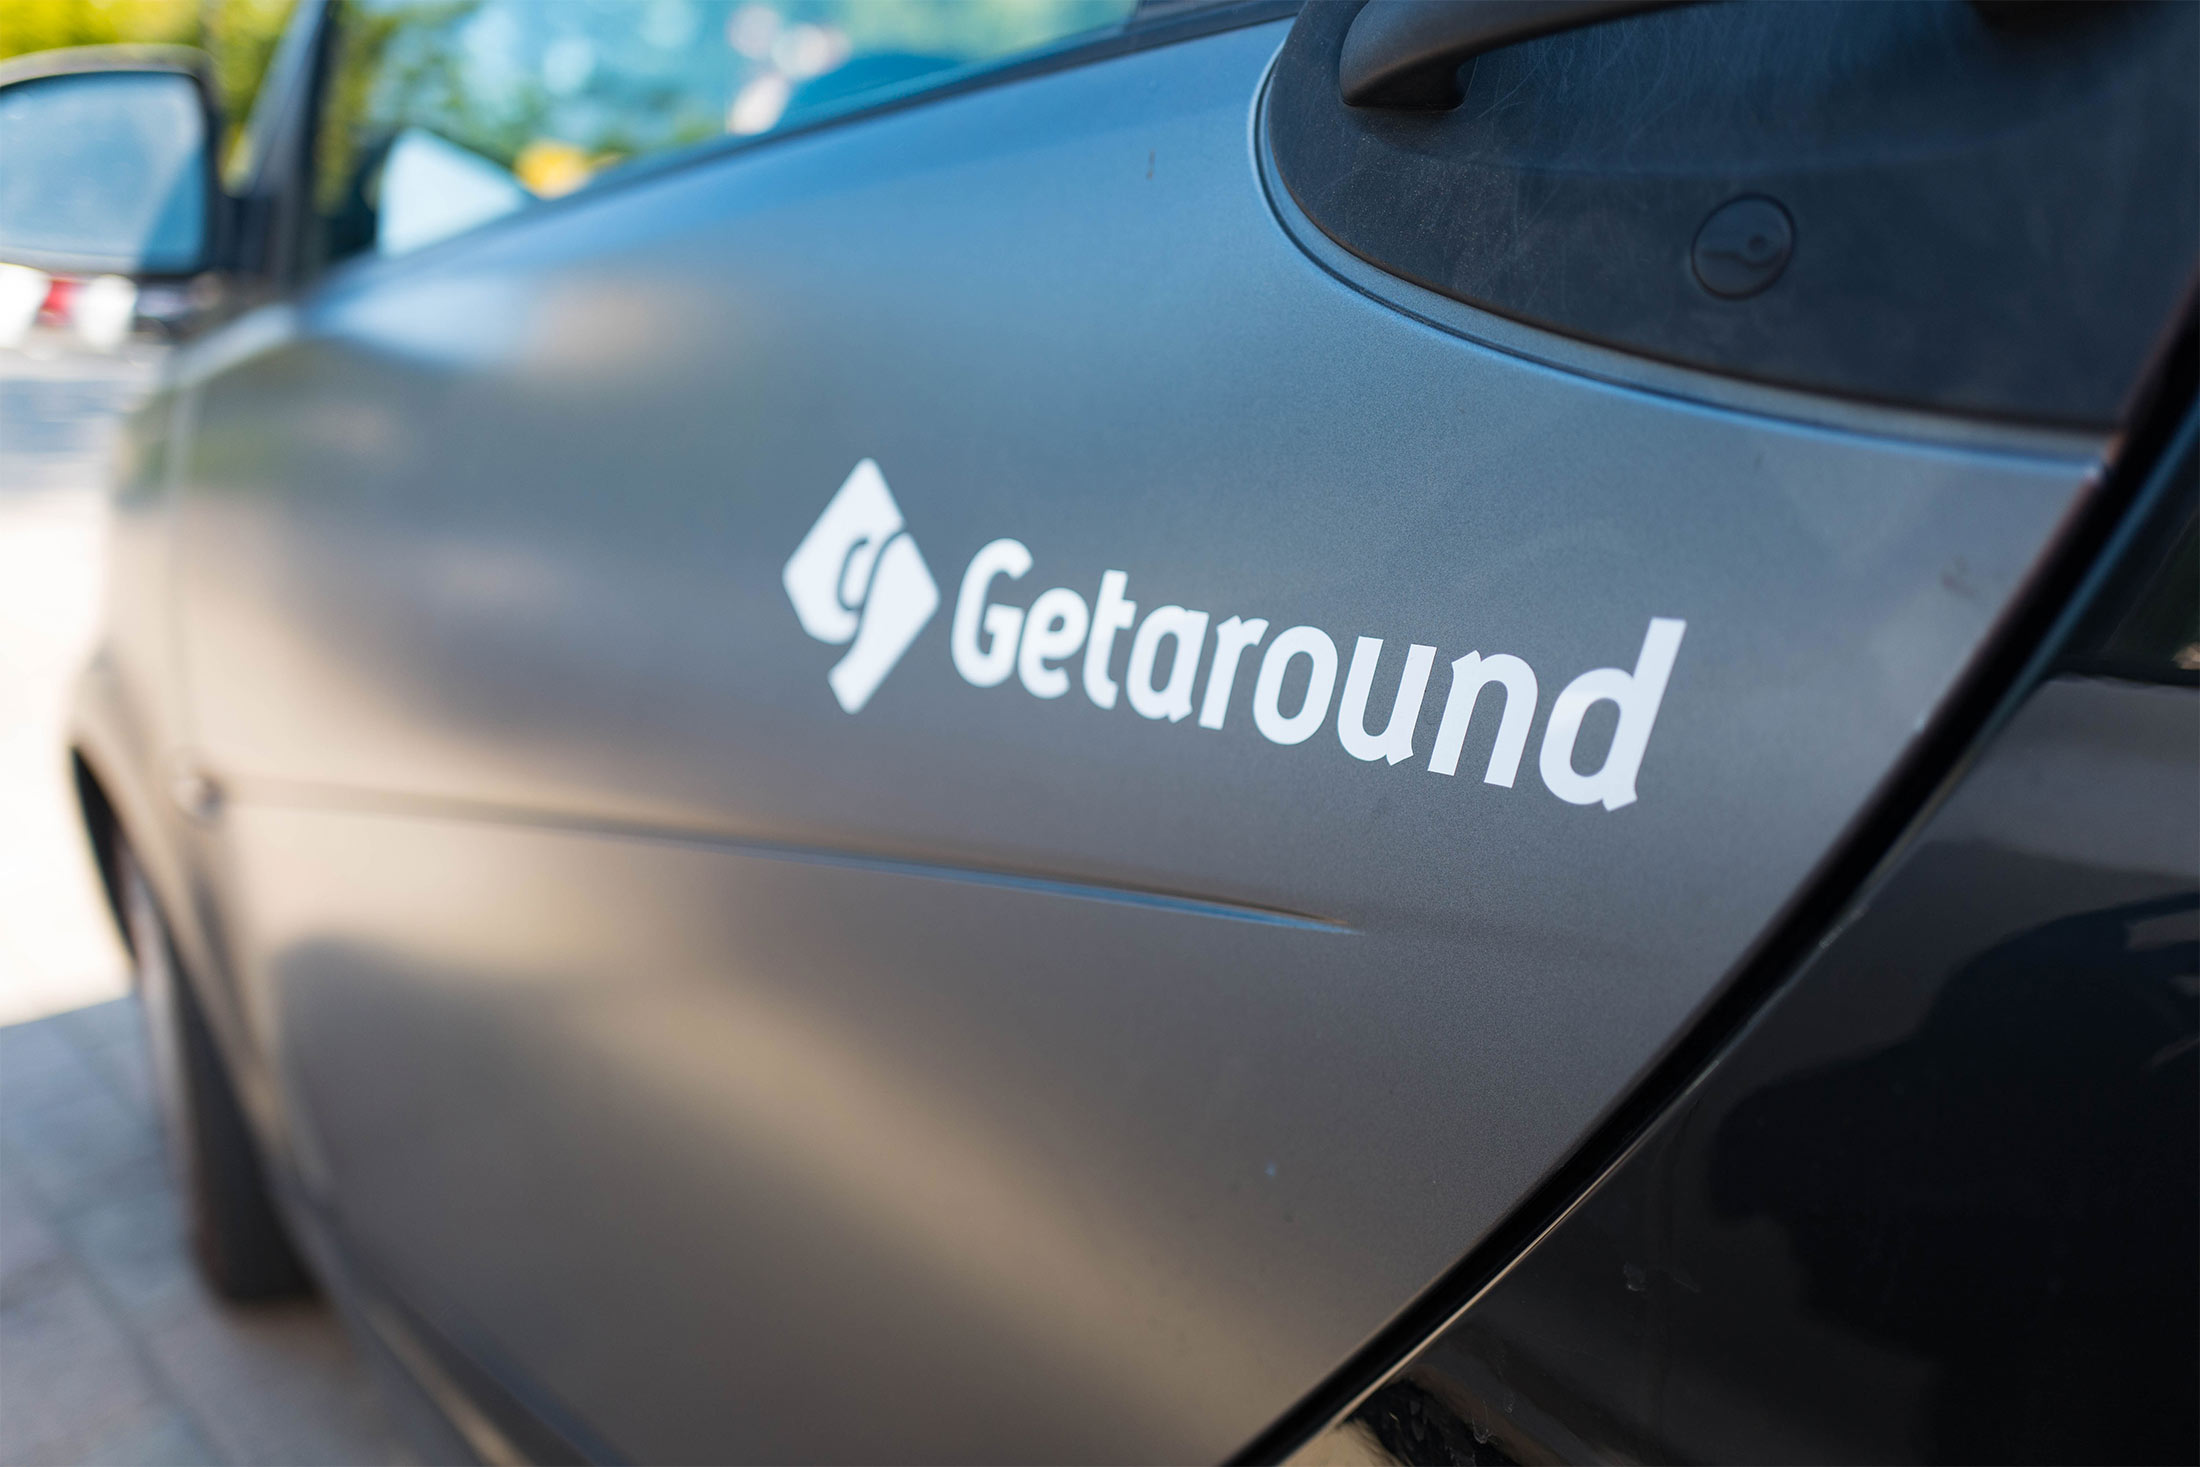 A logo for Getaround peer-to-peer car-sharing service is displayed on the side of a car in&nbsp;Mountain View, California.